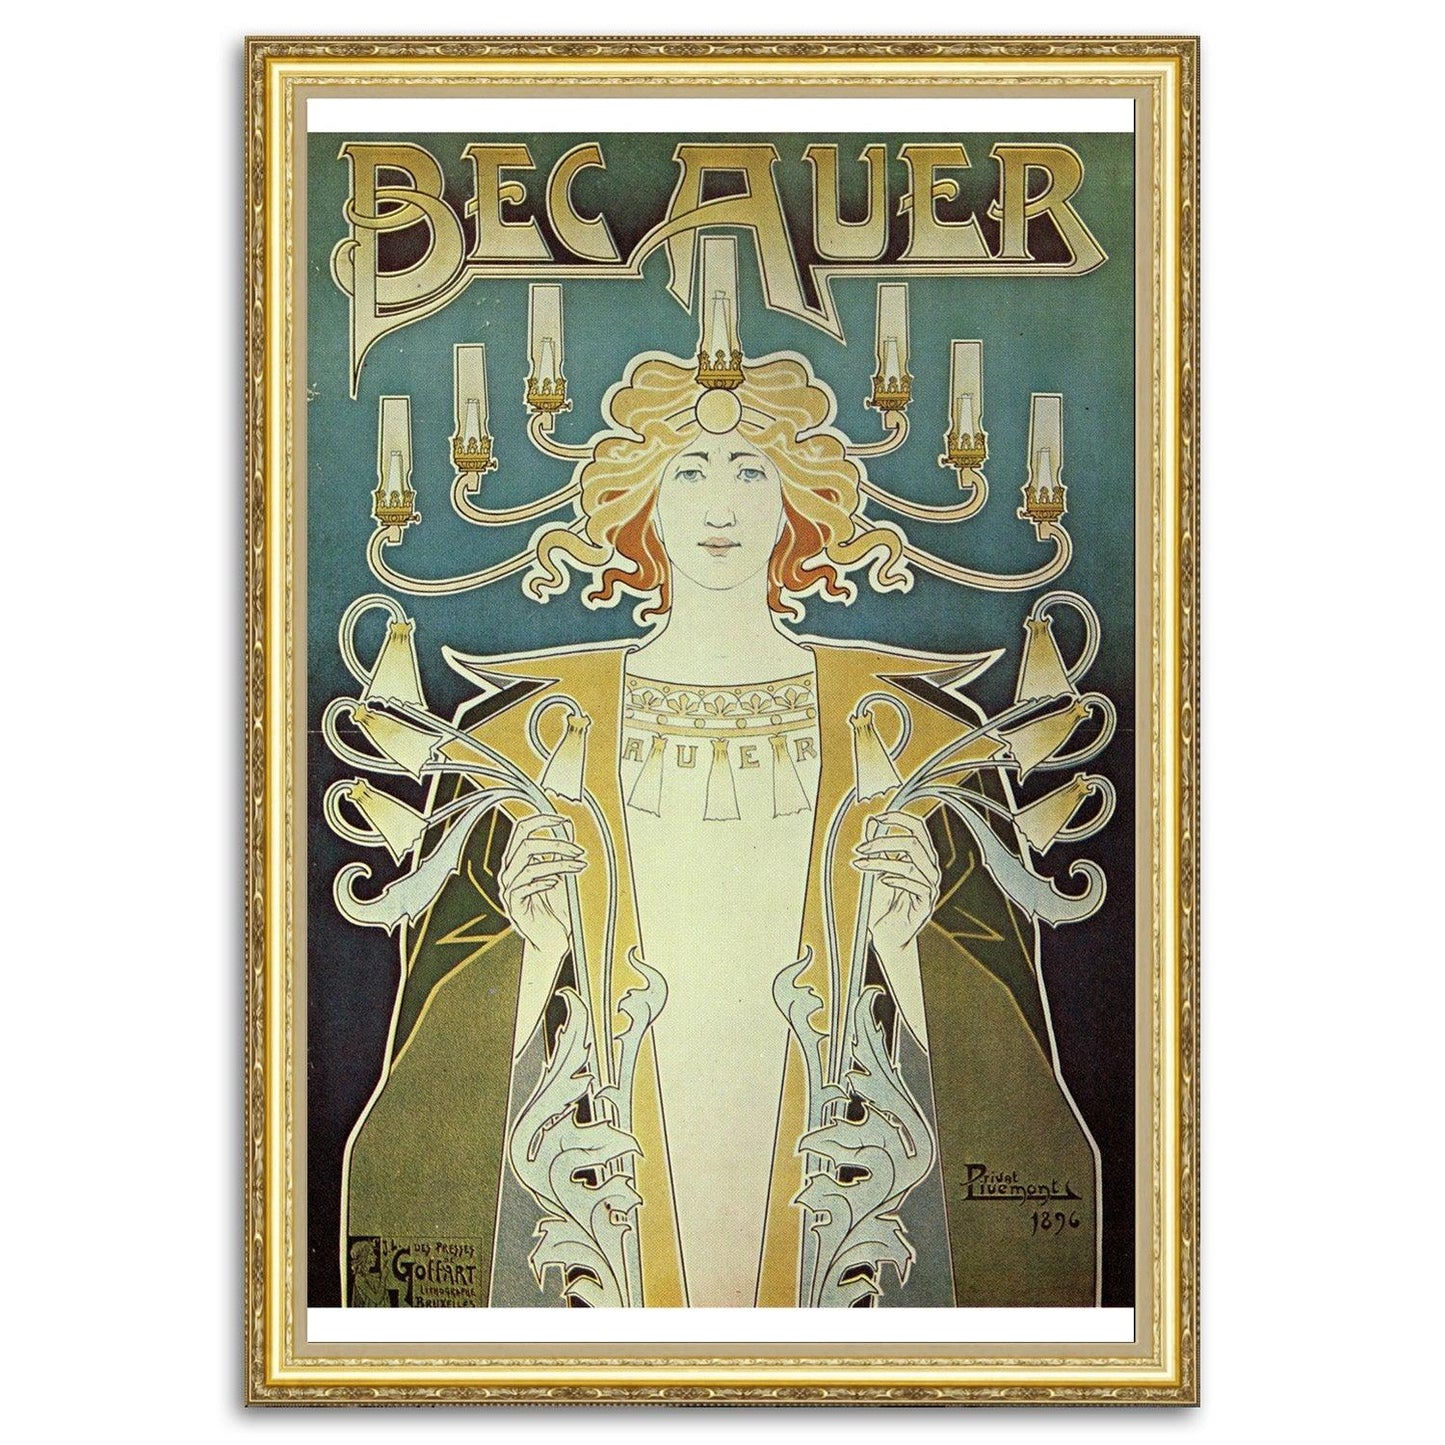 Give your home decor a touch of elegance through our exquisite Bec Auer reproduction poster. The artwork is a collage with the advertising poster for incandescent gas illumination design by Privat Livemont (Belgian graphic designer, 1861-1936). Year of created 1896.